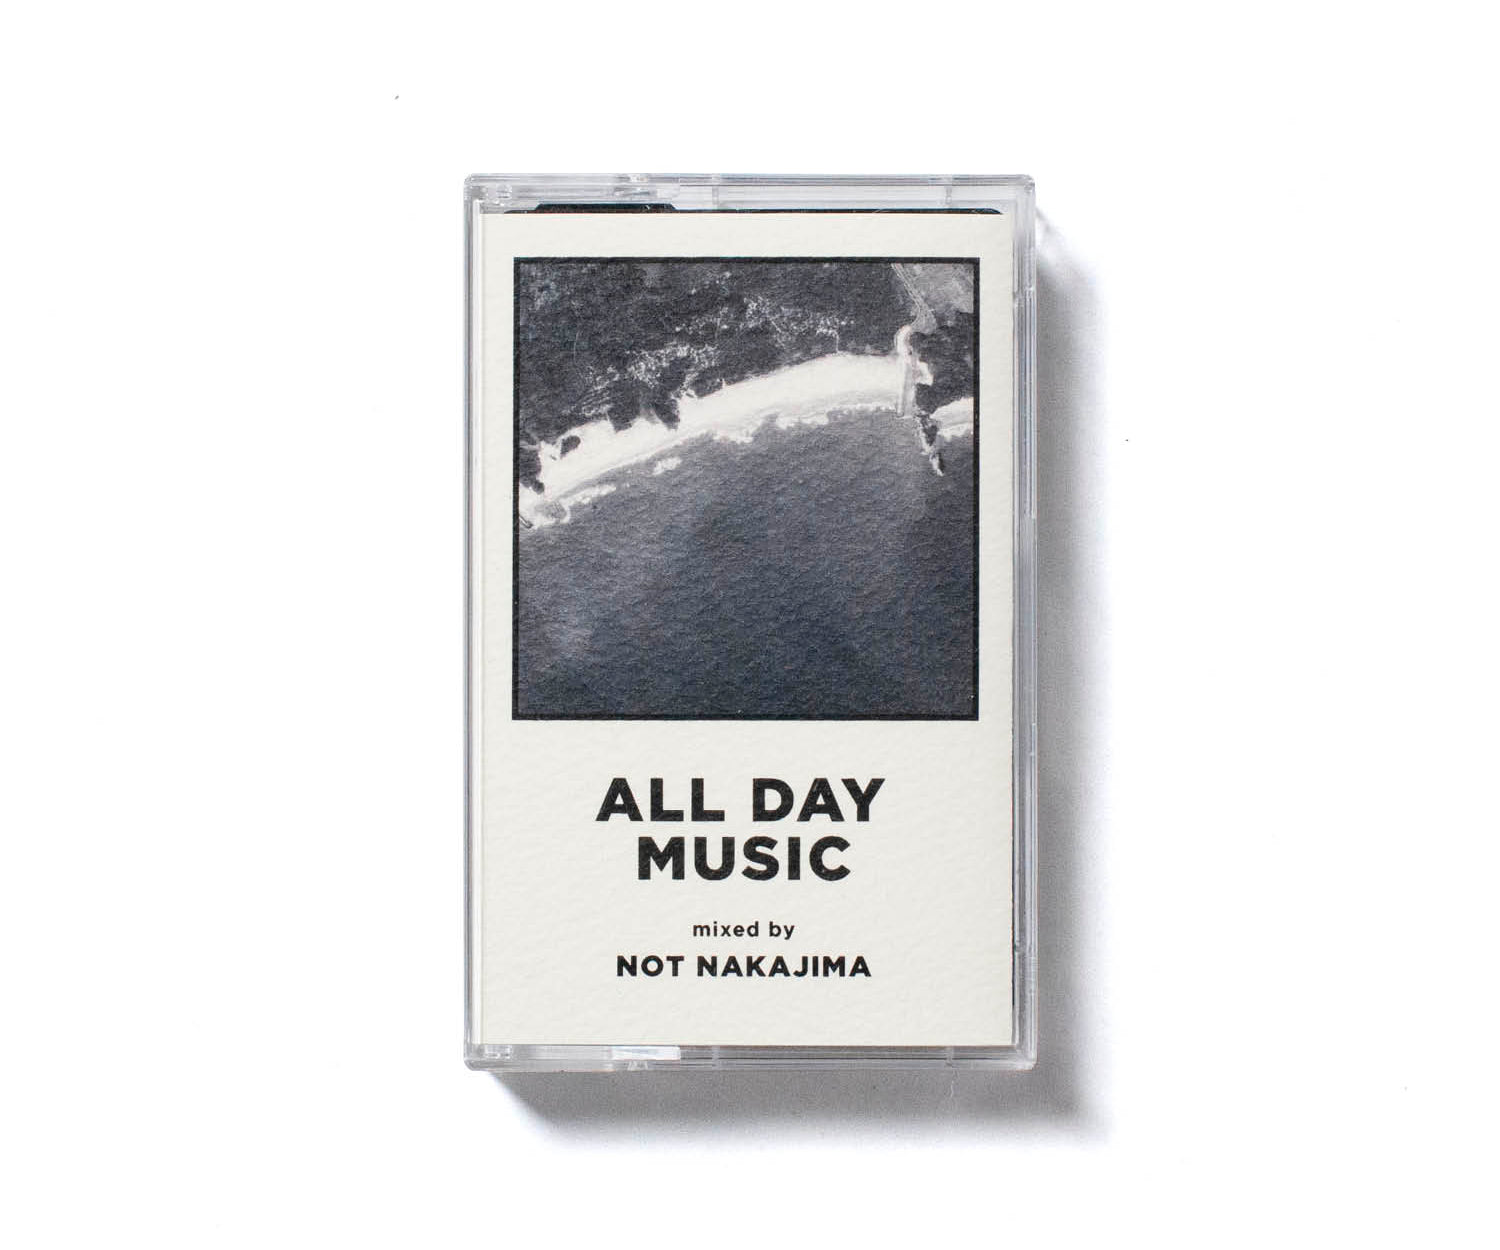 A.D.M. #16 - Mixed by NOT NAKAJIMA | LIKE THIS SHOP